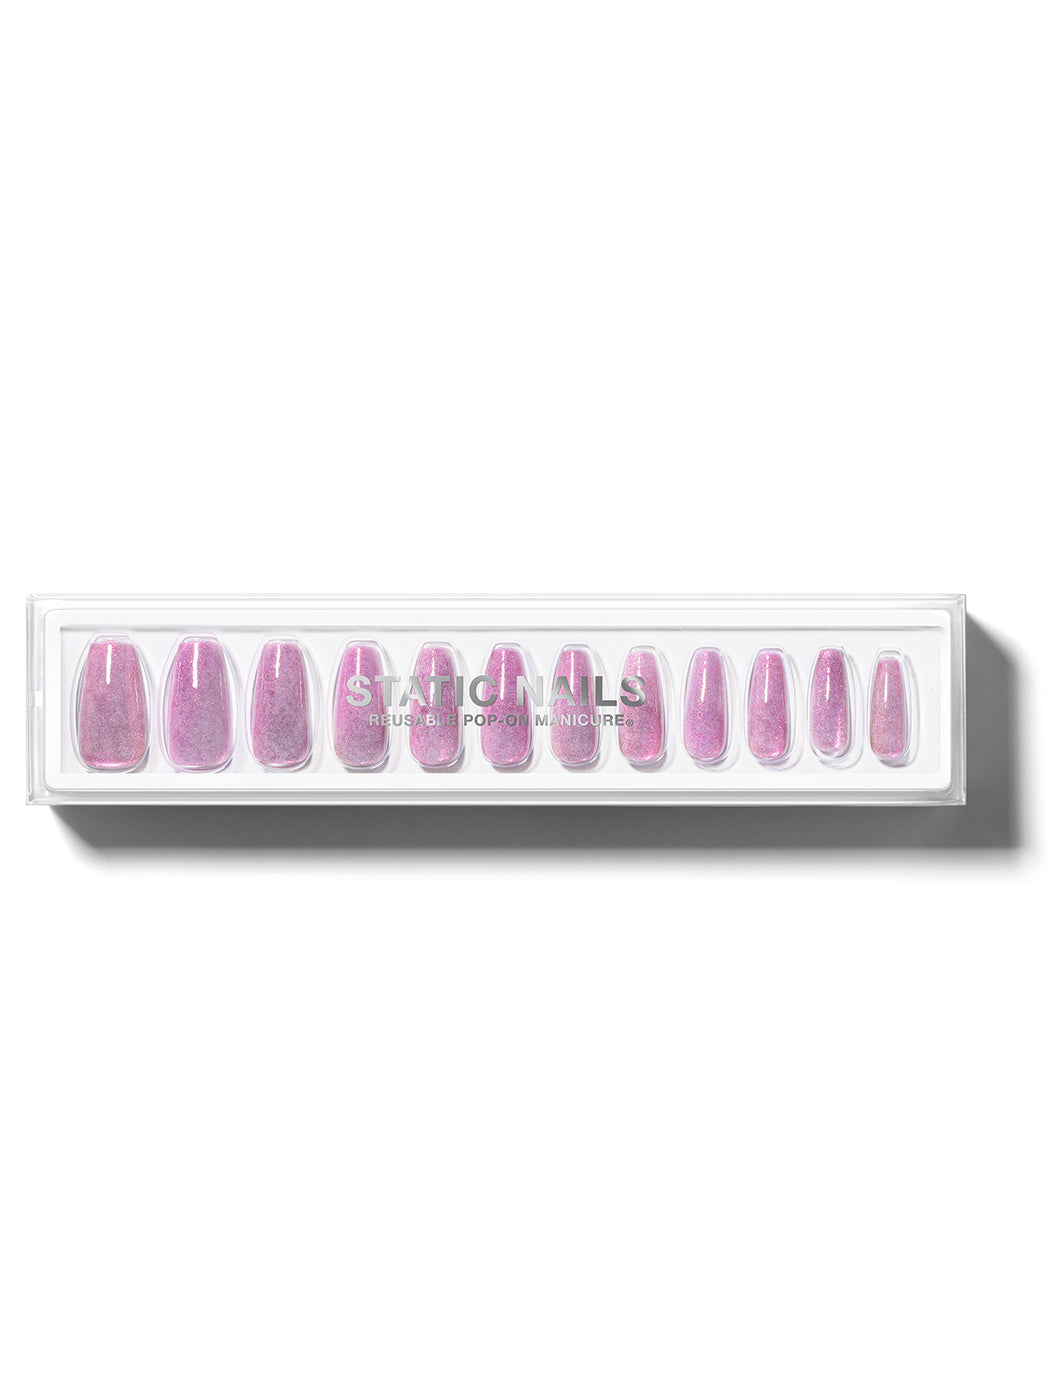 Lavender manicure with pink cat-eye effect in long coffin shape,